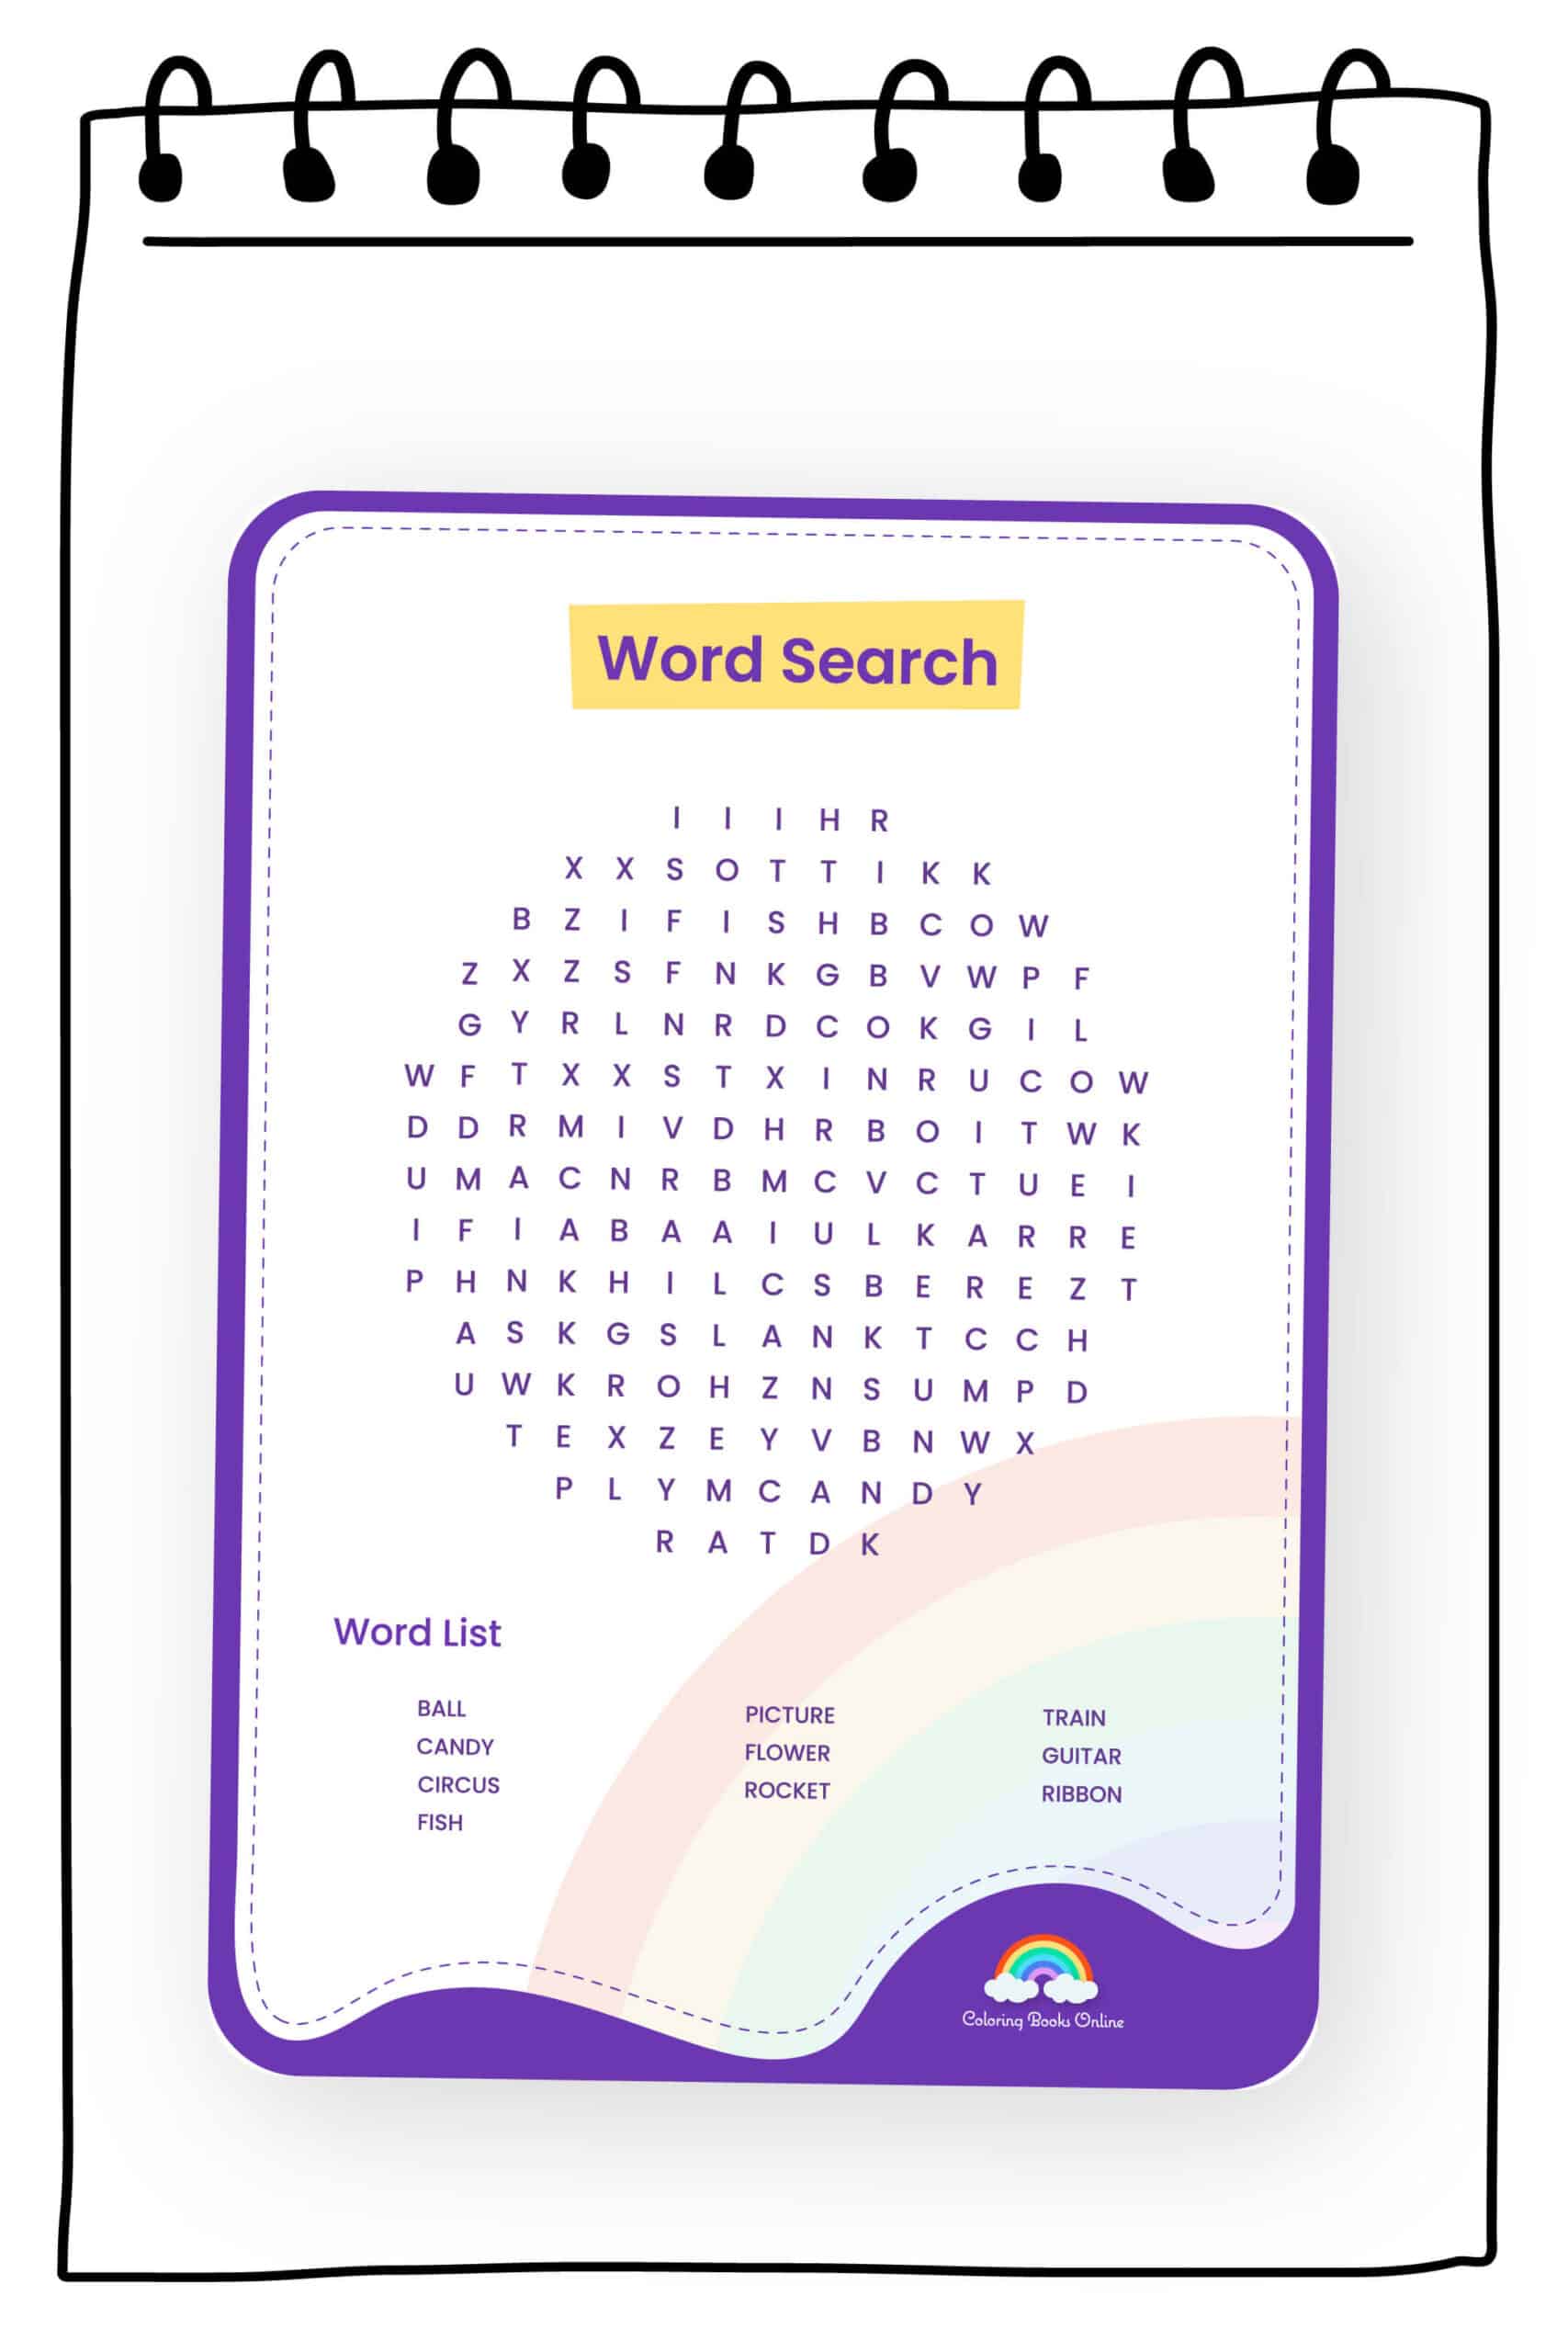 WORD SEARCH